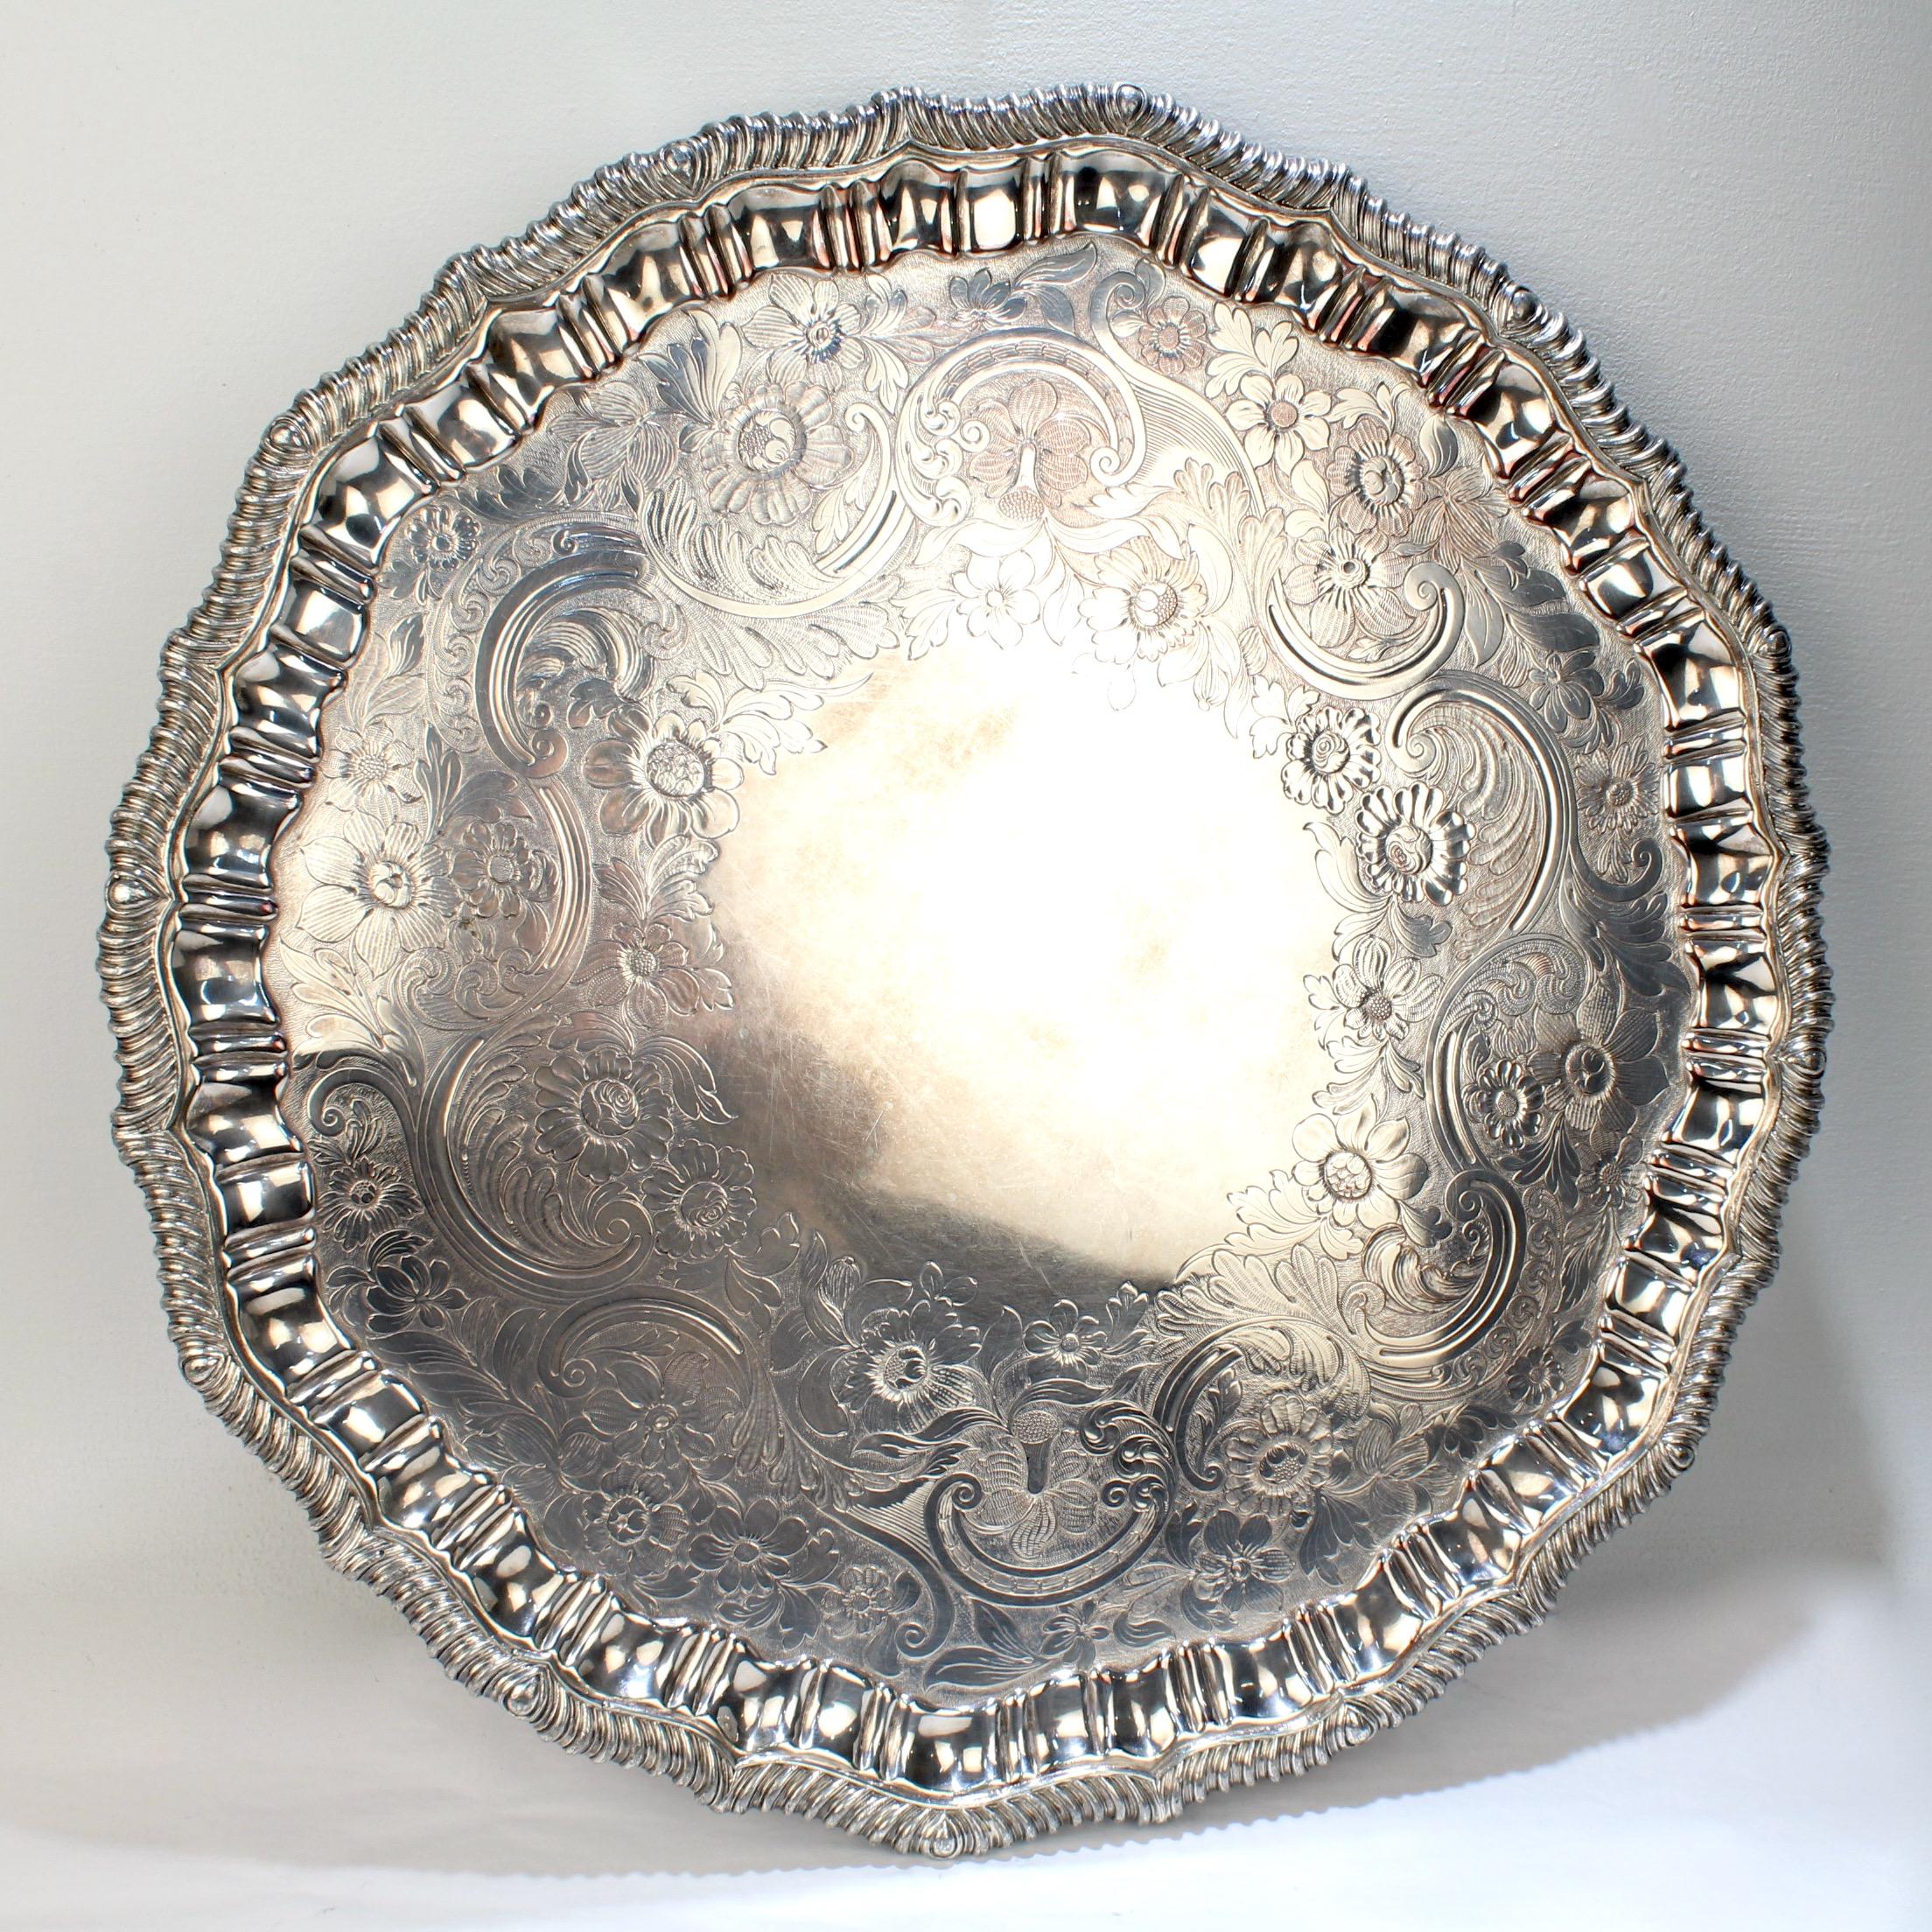 A very large, Victorian period Sheffield silver plate salver. 

With a gadrooned piecrust rim, richly engraved center, and ornate bracket feet.

Provenance: By repute, from the estate of Catherine Spencer Eddy Beveridge (who was a Socialite and